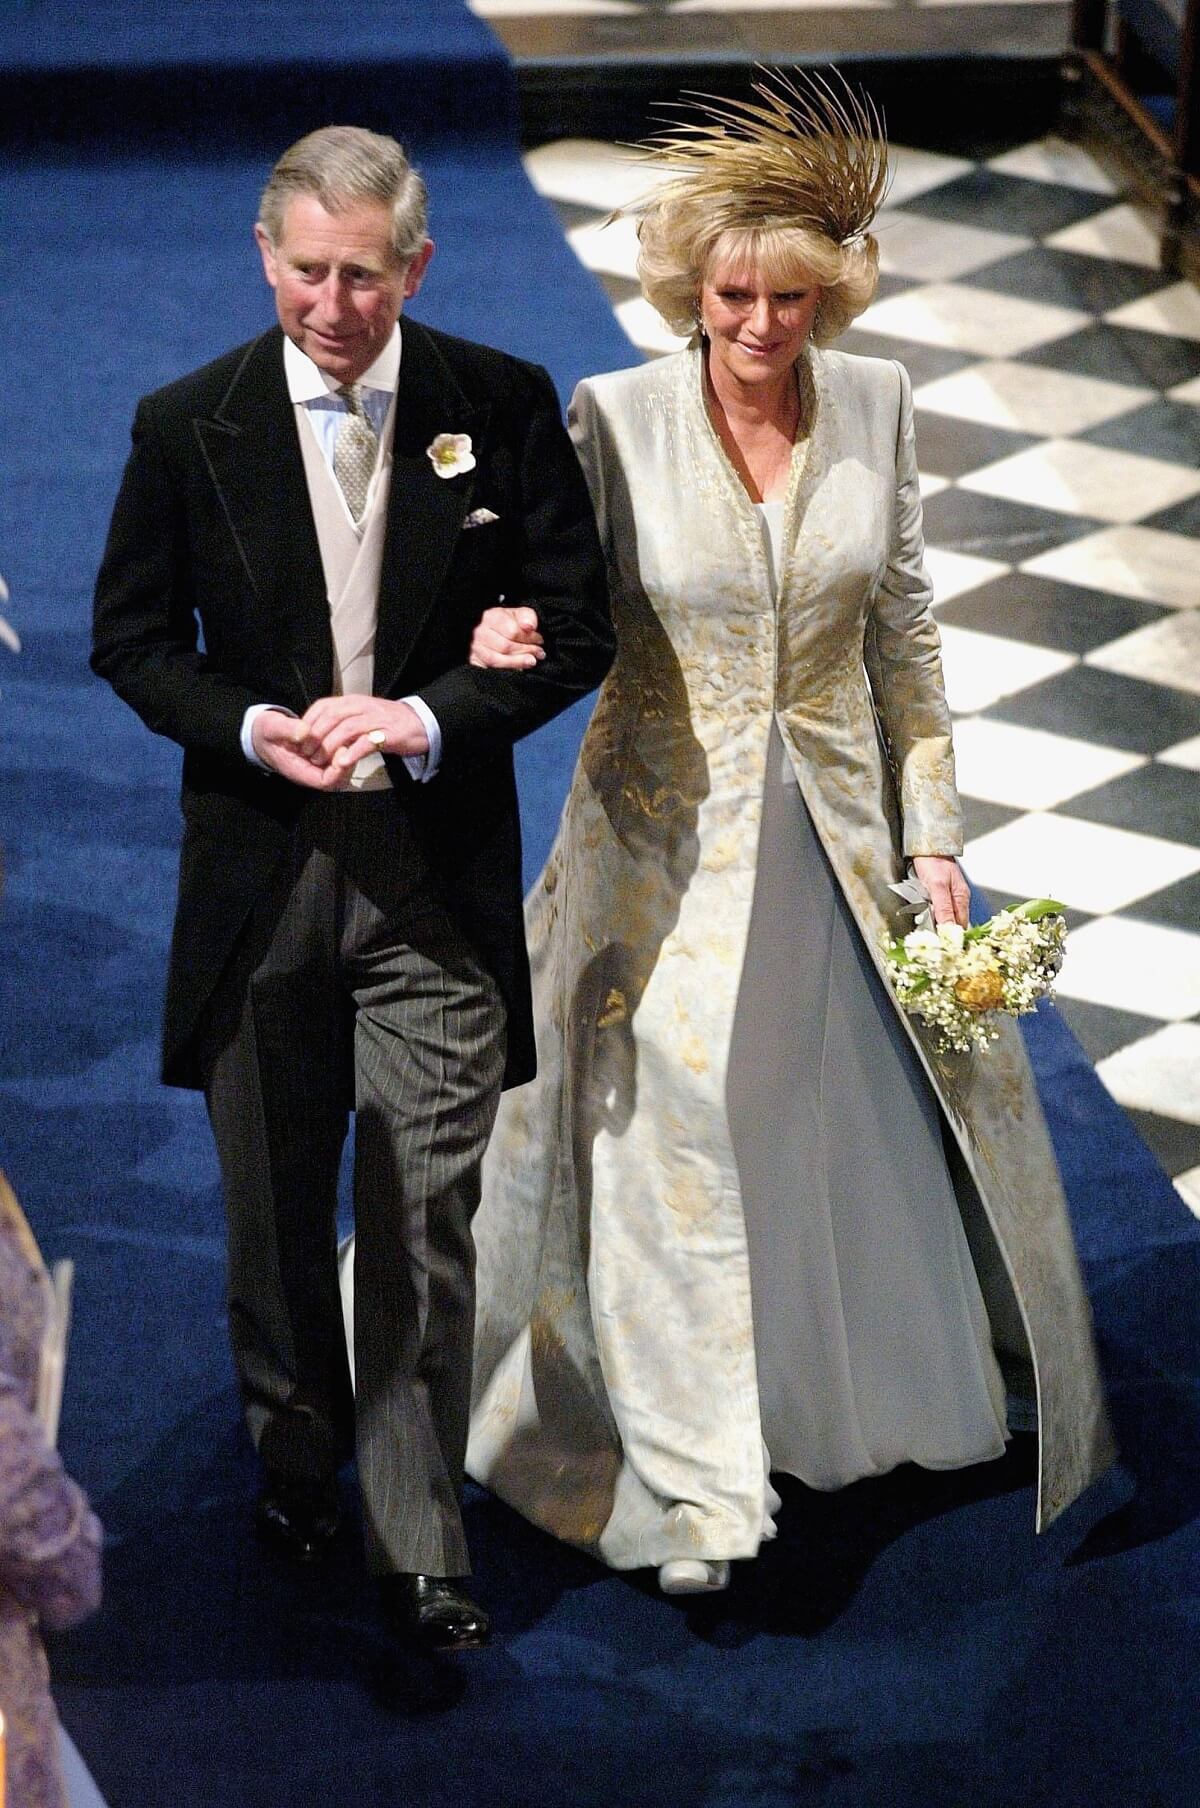 Then-Prince Charles and Camilla Parker Bowles attend the Service of Prayer and Dedication blessing their marriage at Windsor Castle